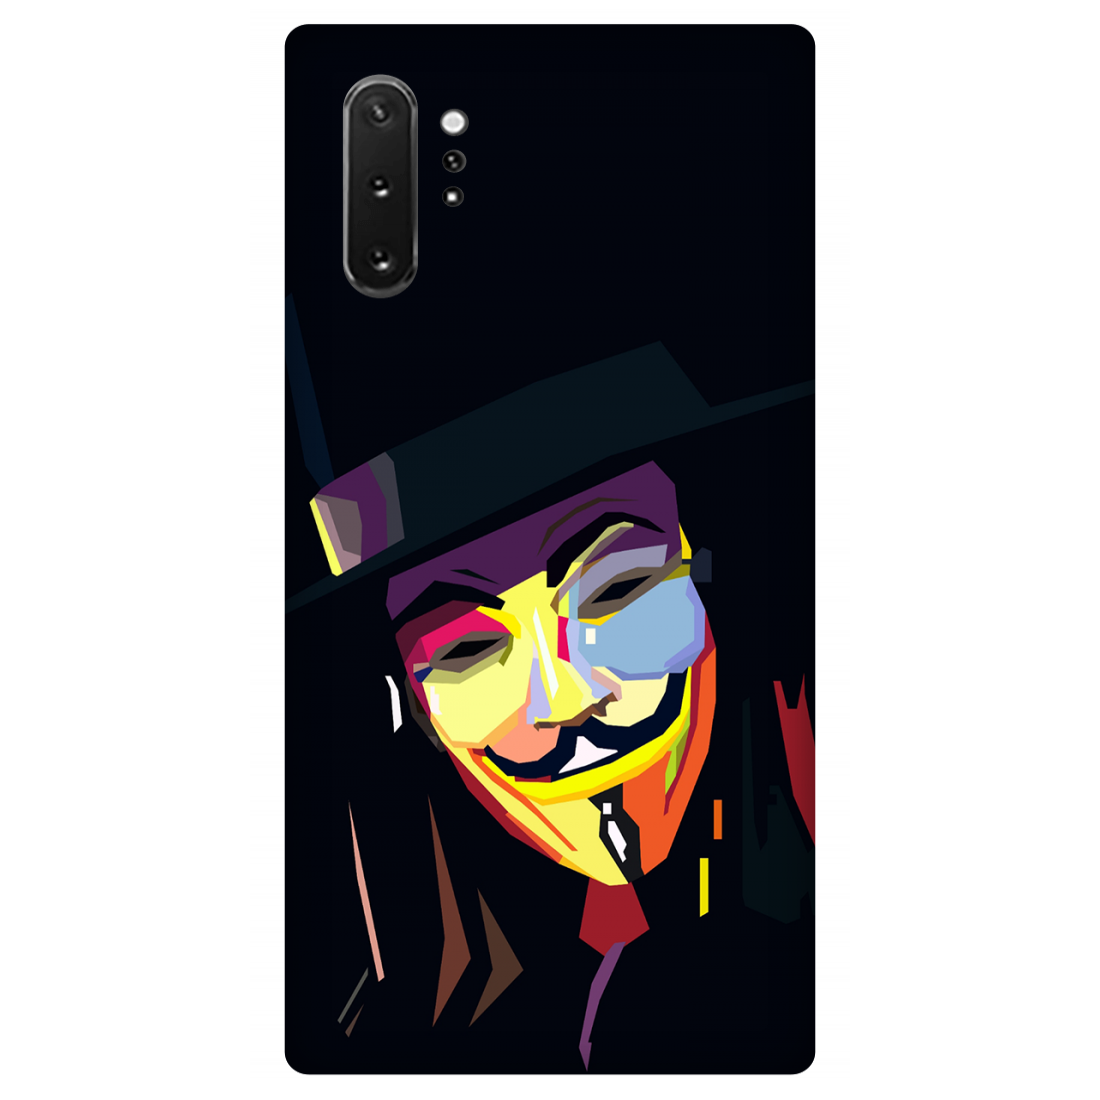 The Guy Fawkes Mask Case Samsung Galaxy Note 10 Plus